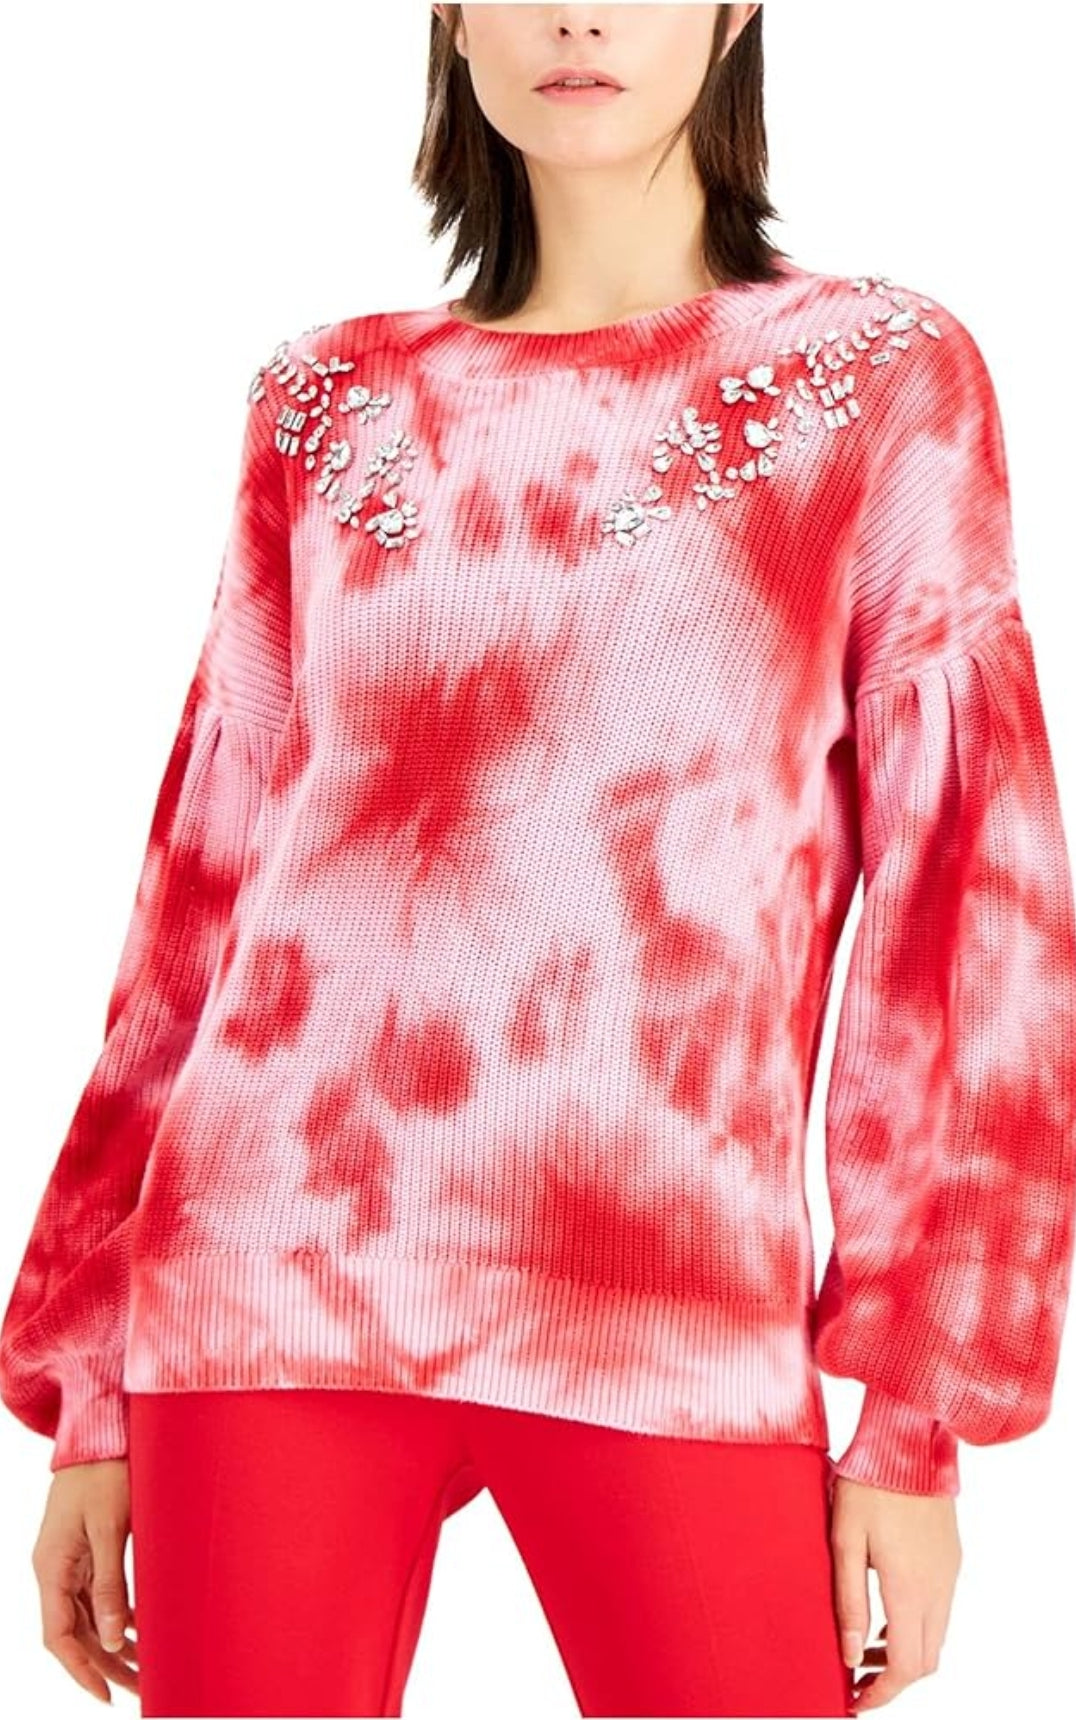 ADRIANNA PAPELL Womens Tie-Dye with Rhinestones Pullover Sweater 12 12 Dresses by Prom girl | Brands Overstock